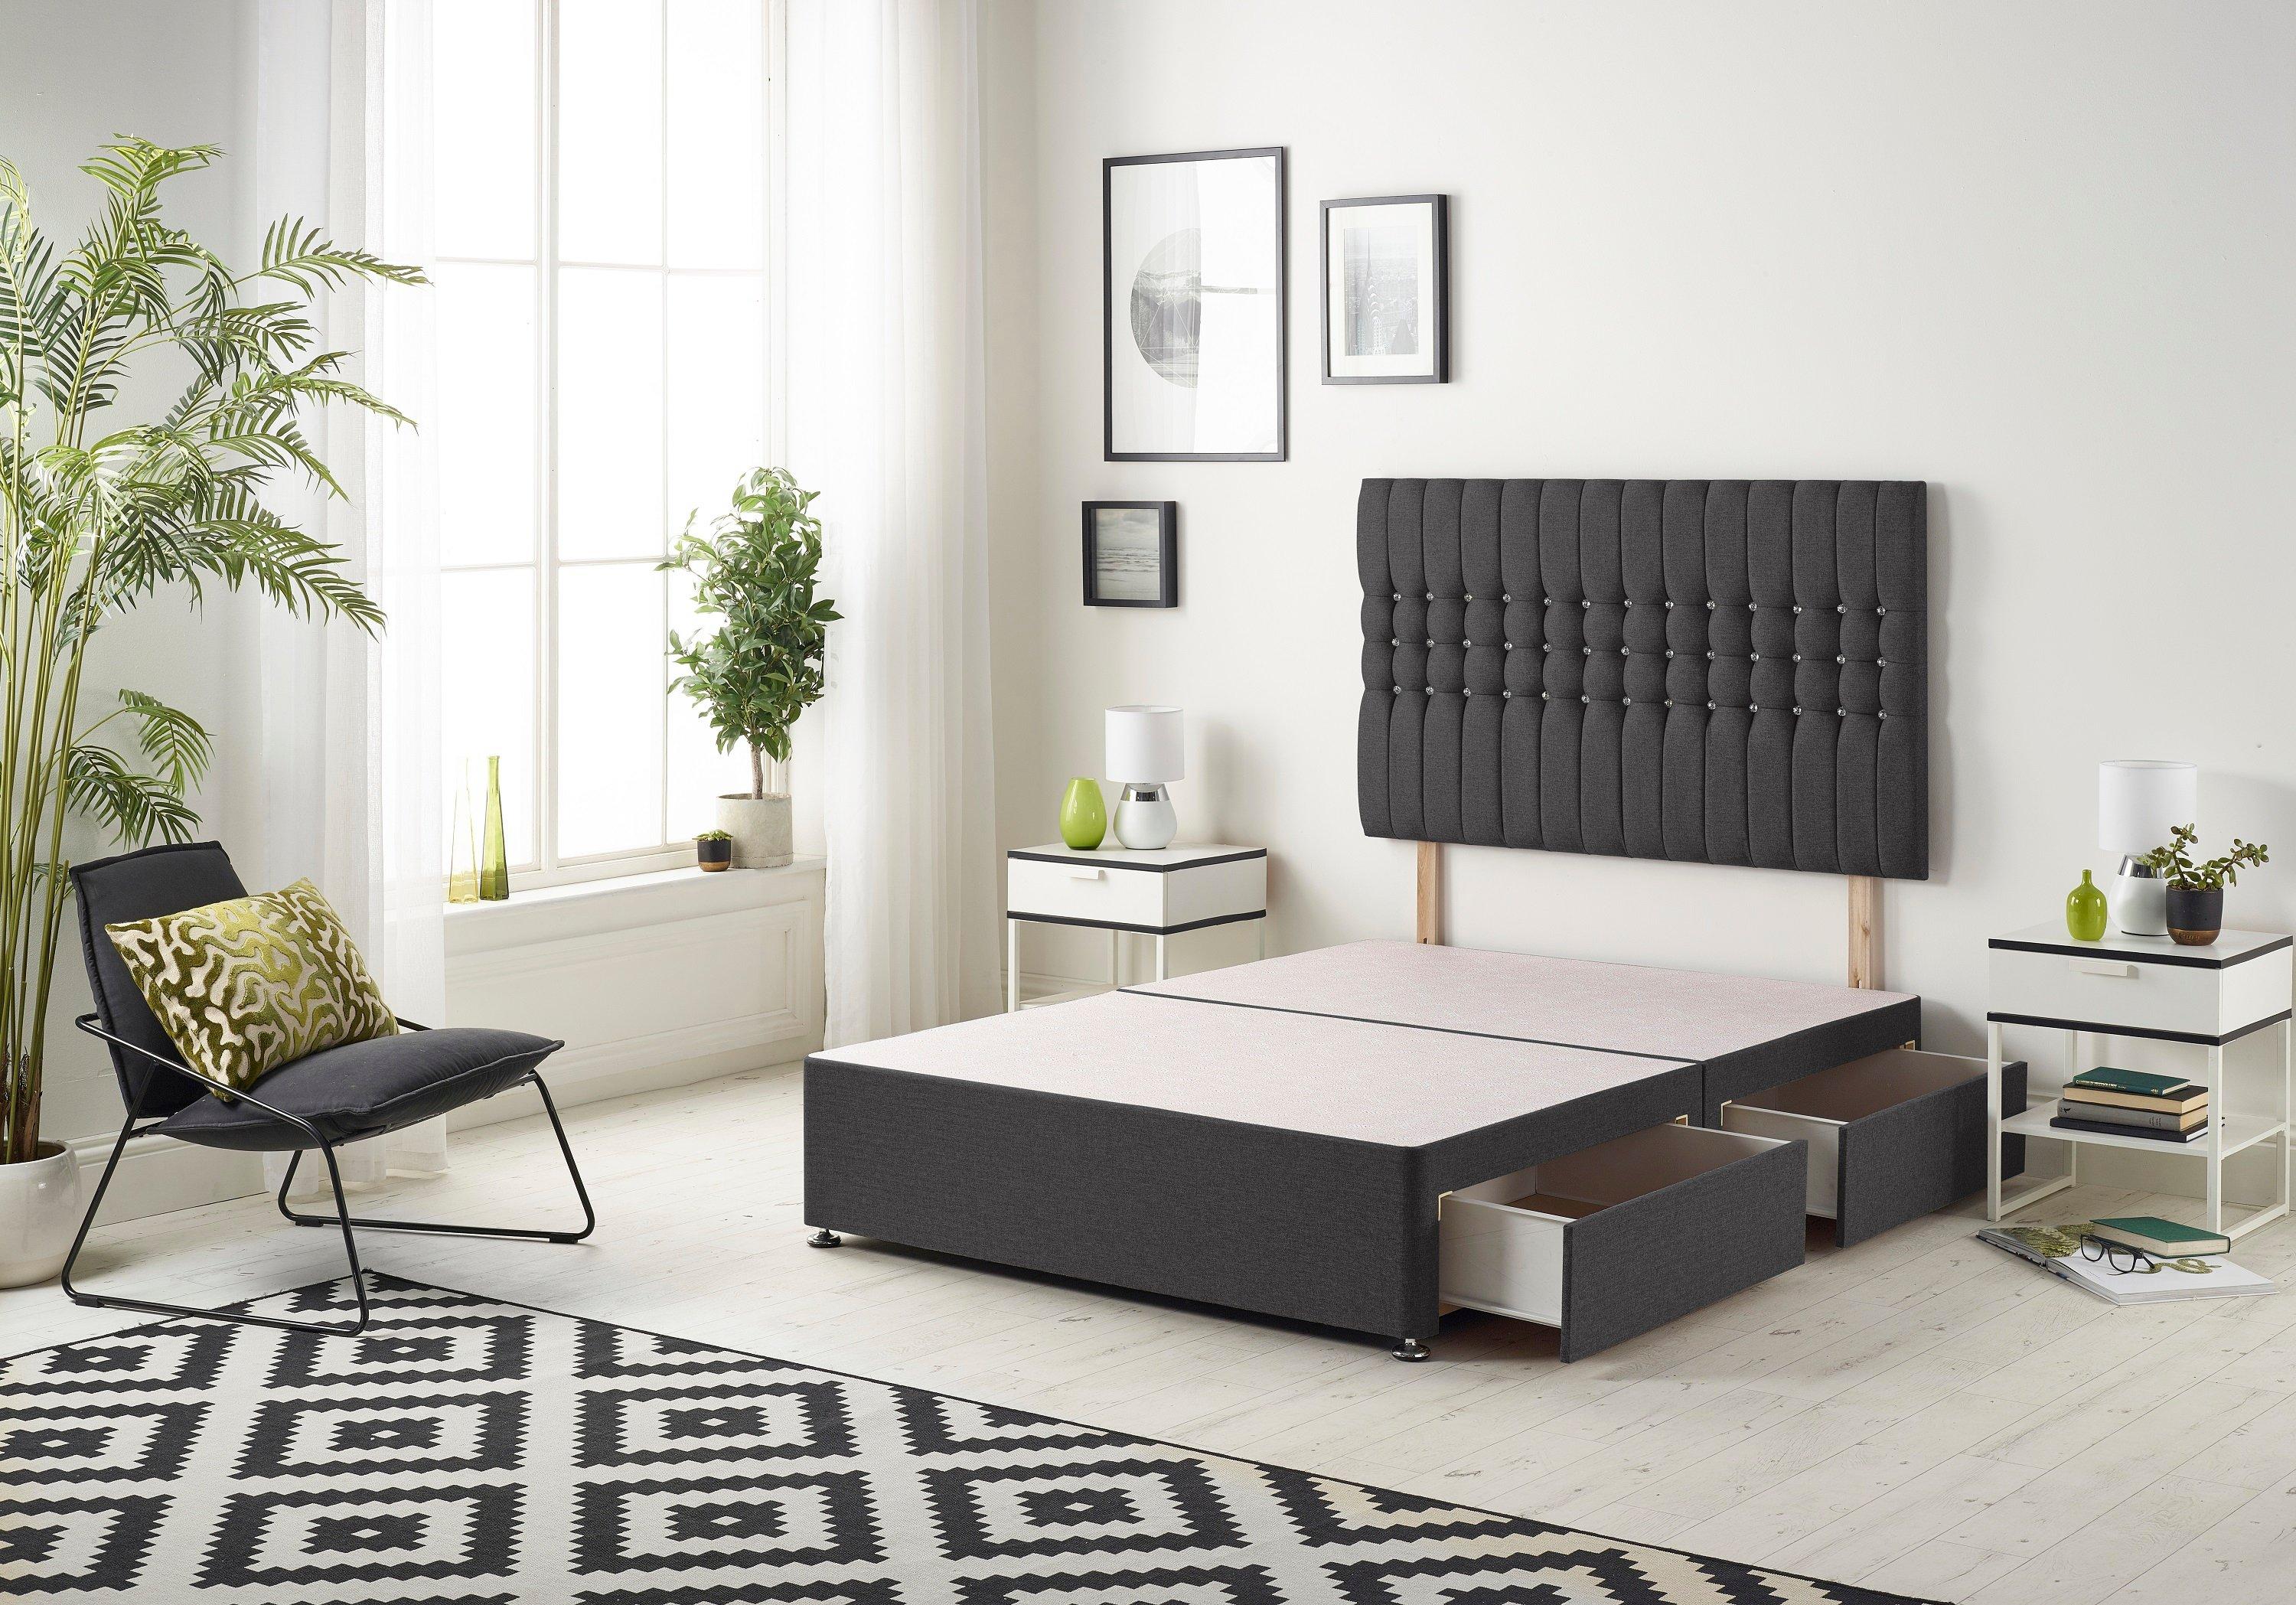 Galaxy Divan Bed Base With 4 Drawers and Headboard Plush